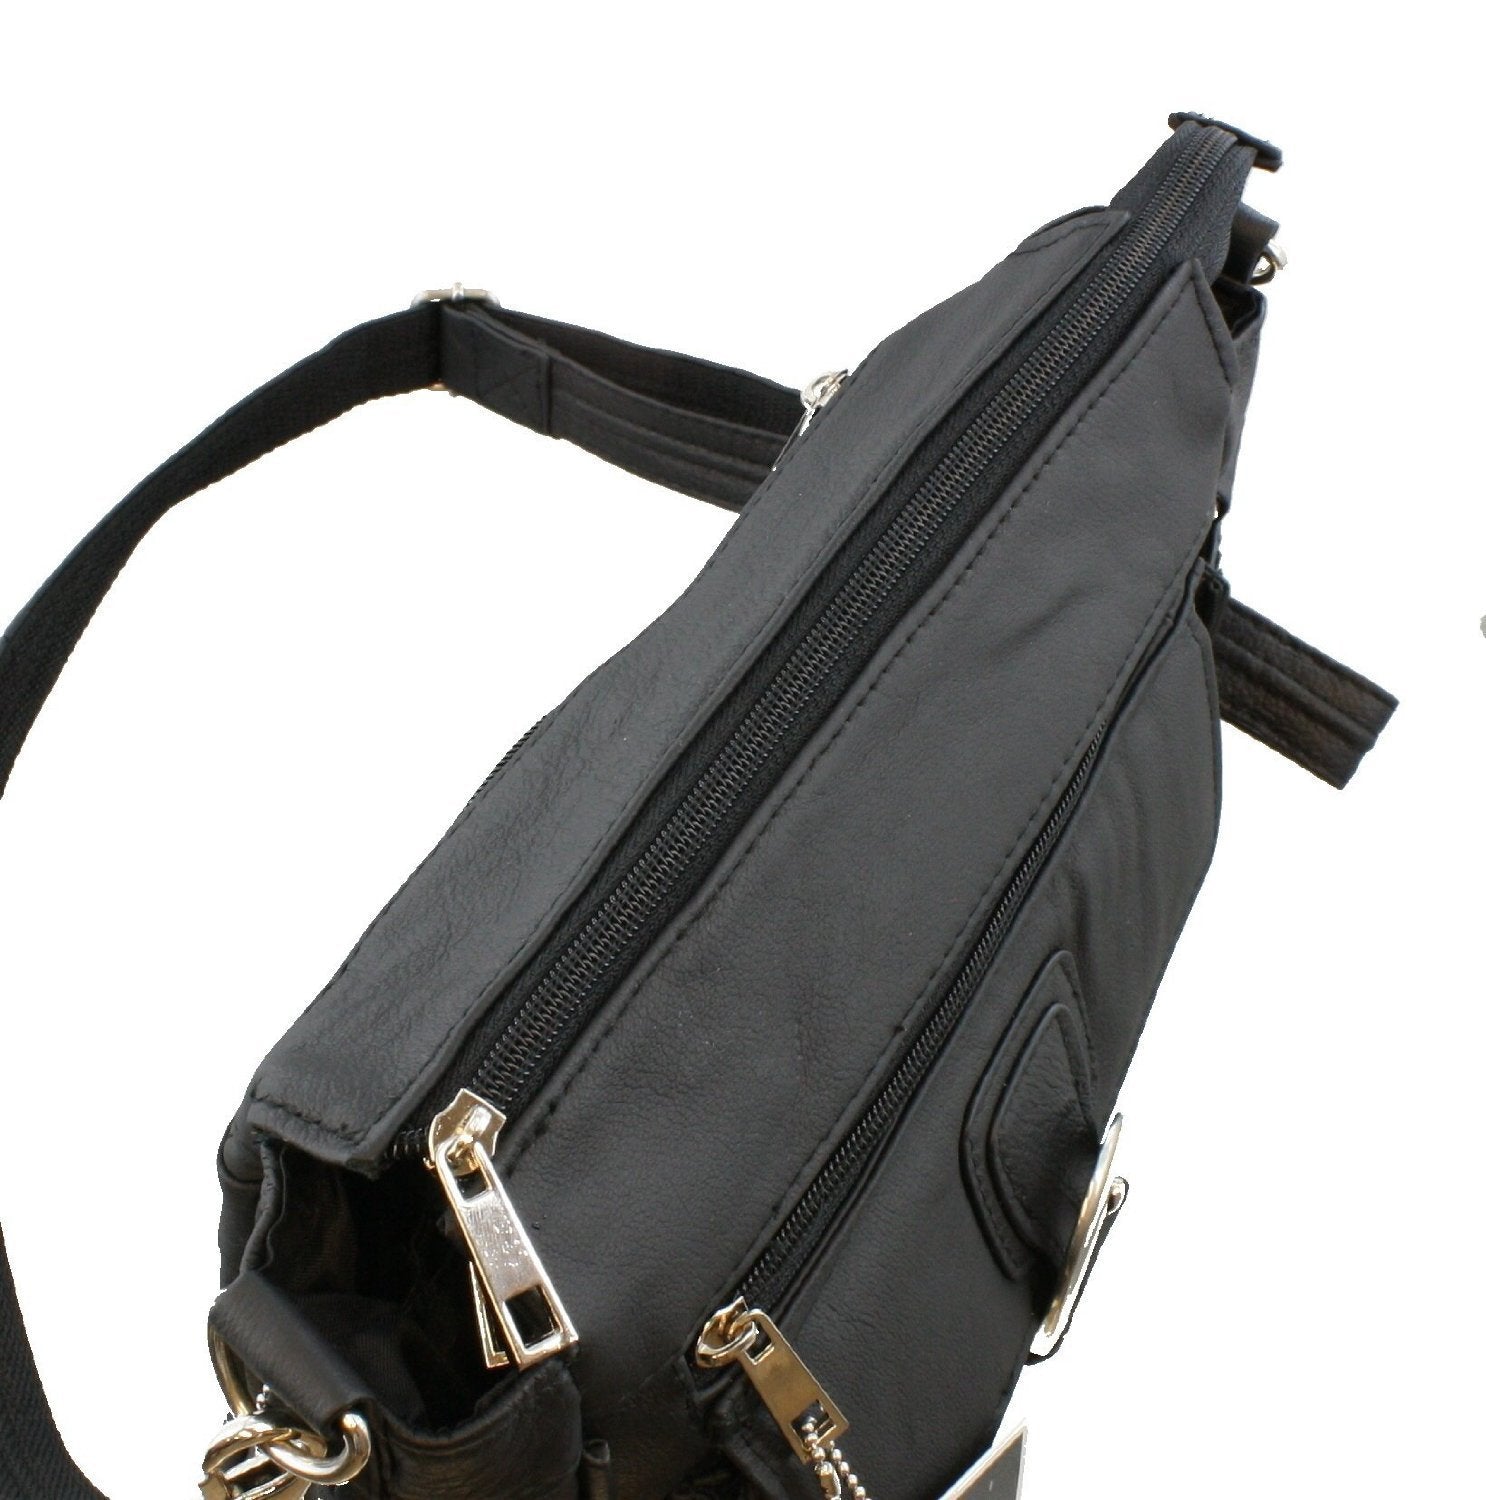 Compact Crossbody Locking Concealed Carry Purse – ccwbags.com